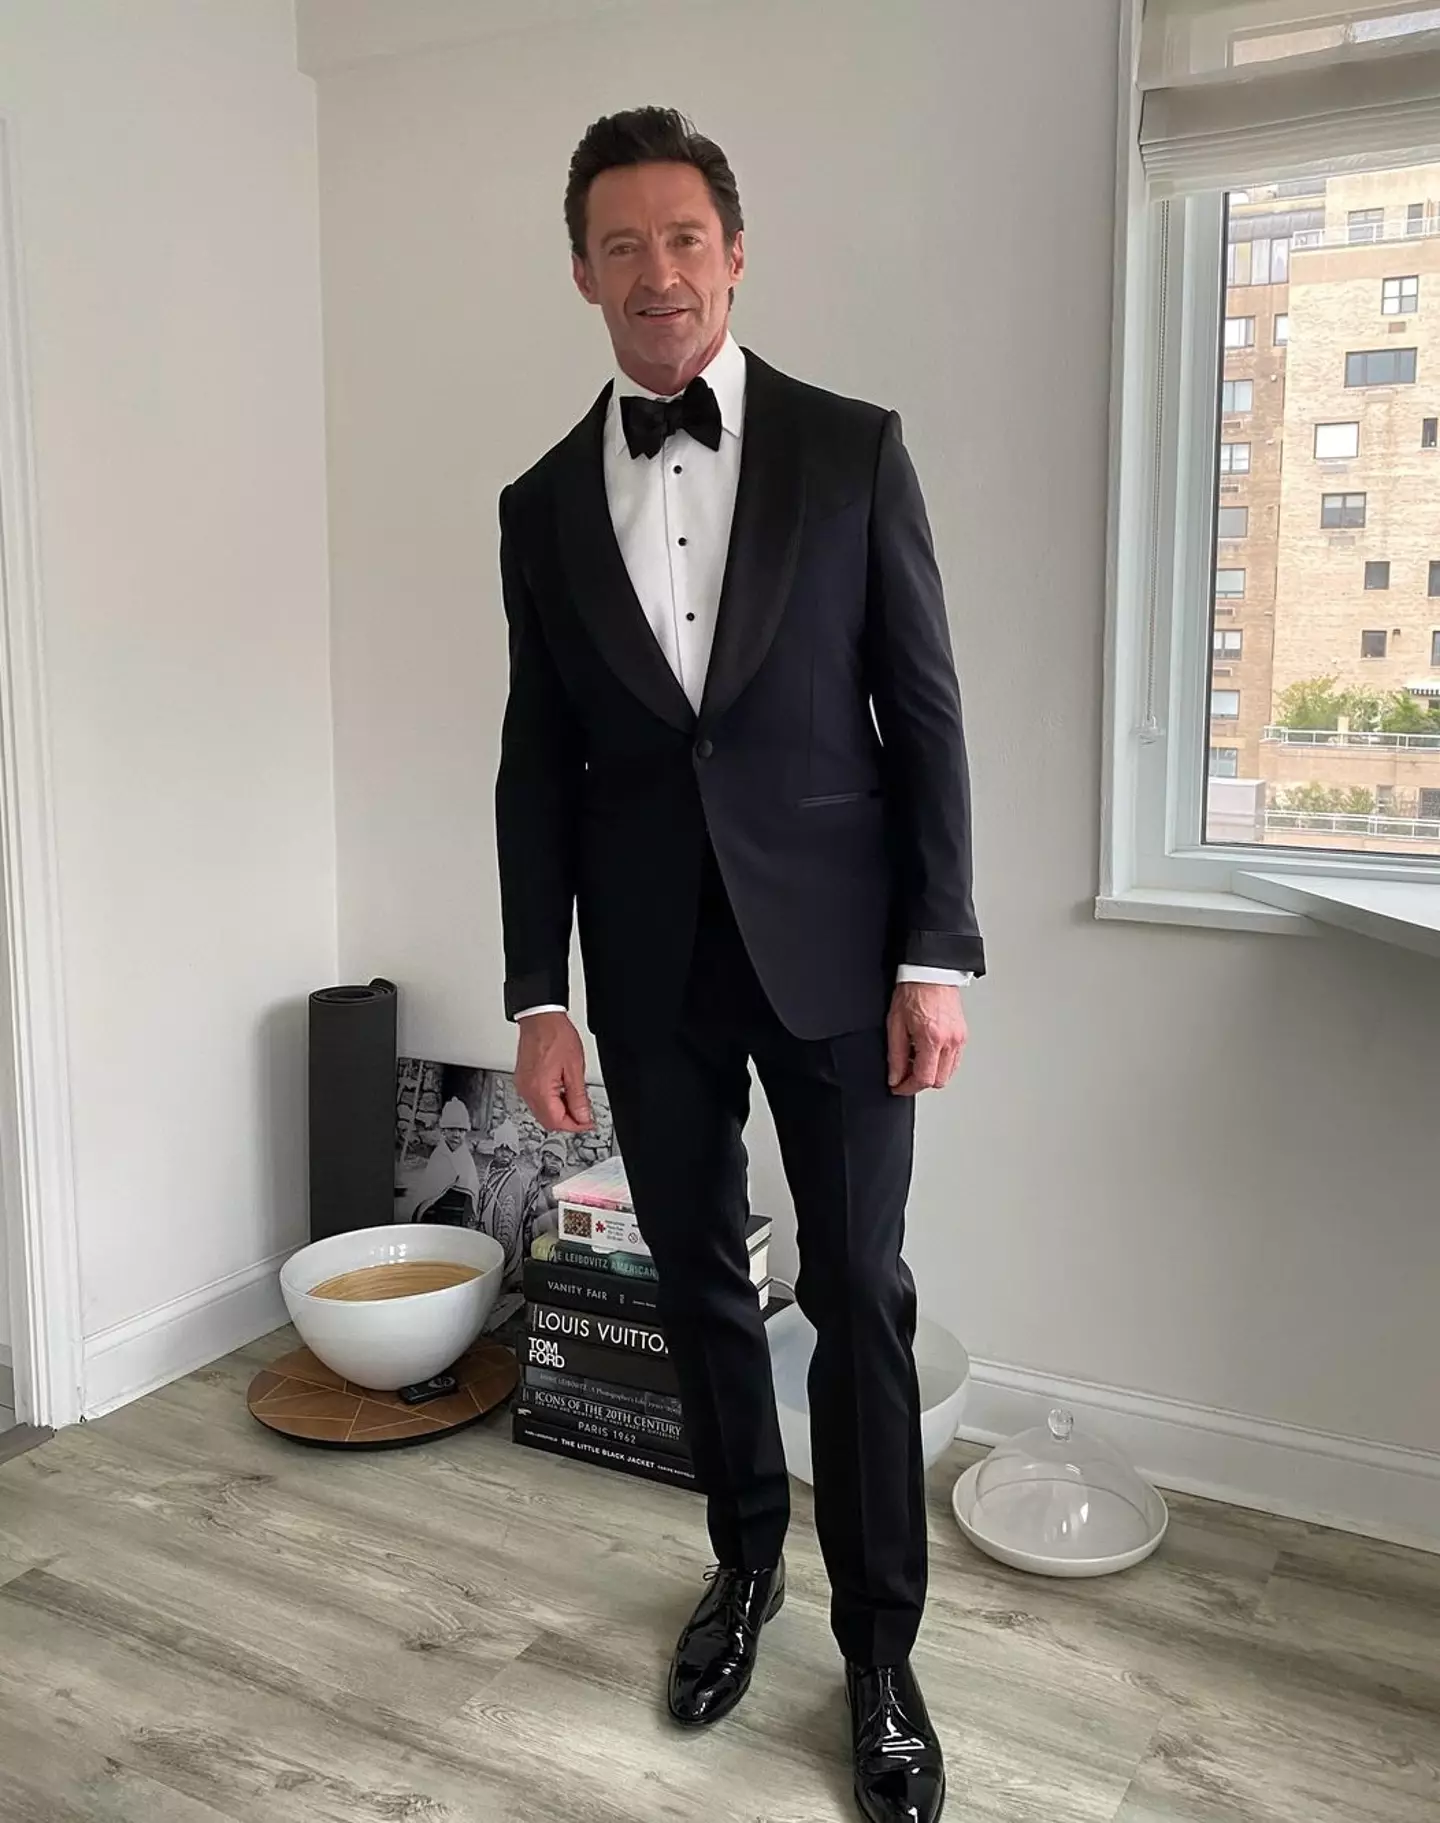 Jackman suited and booted. (thehughjackman/Instagram)